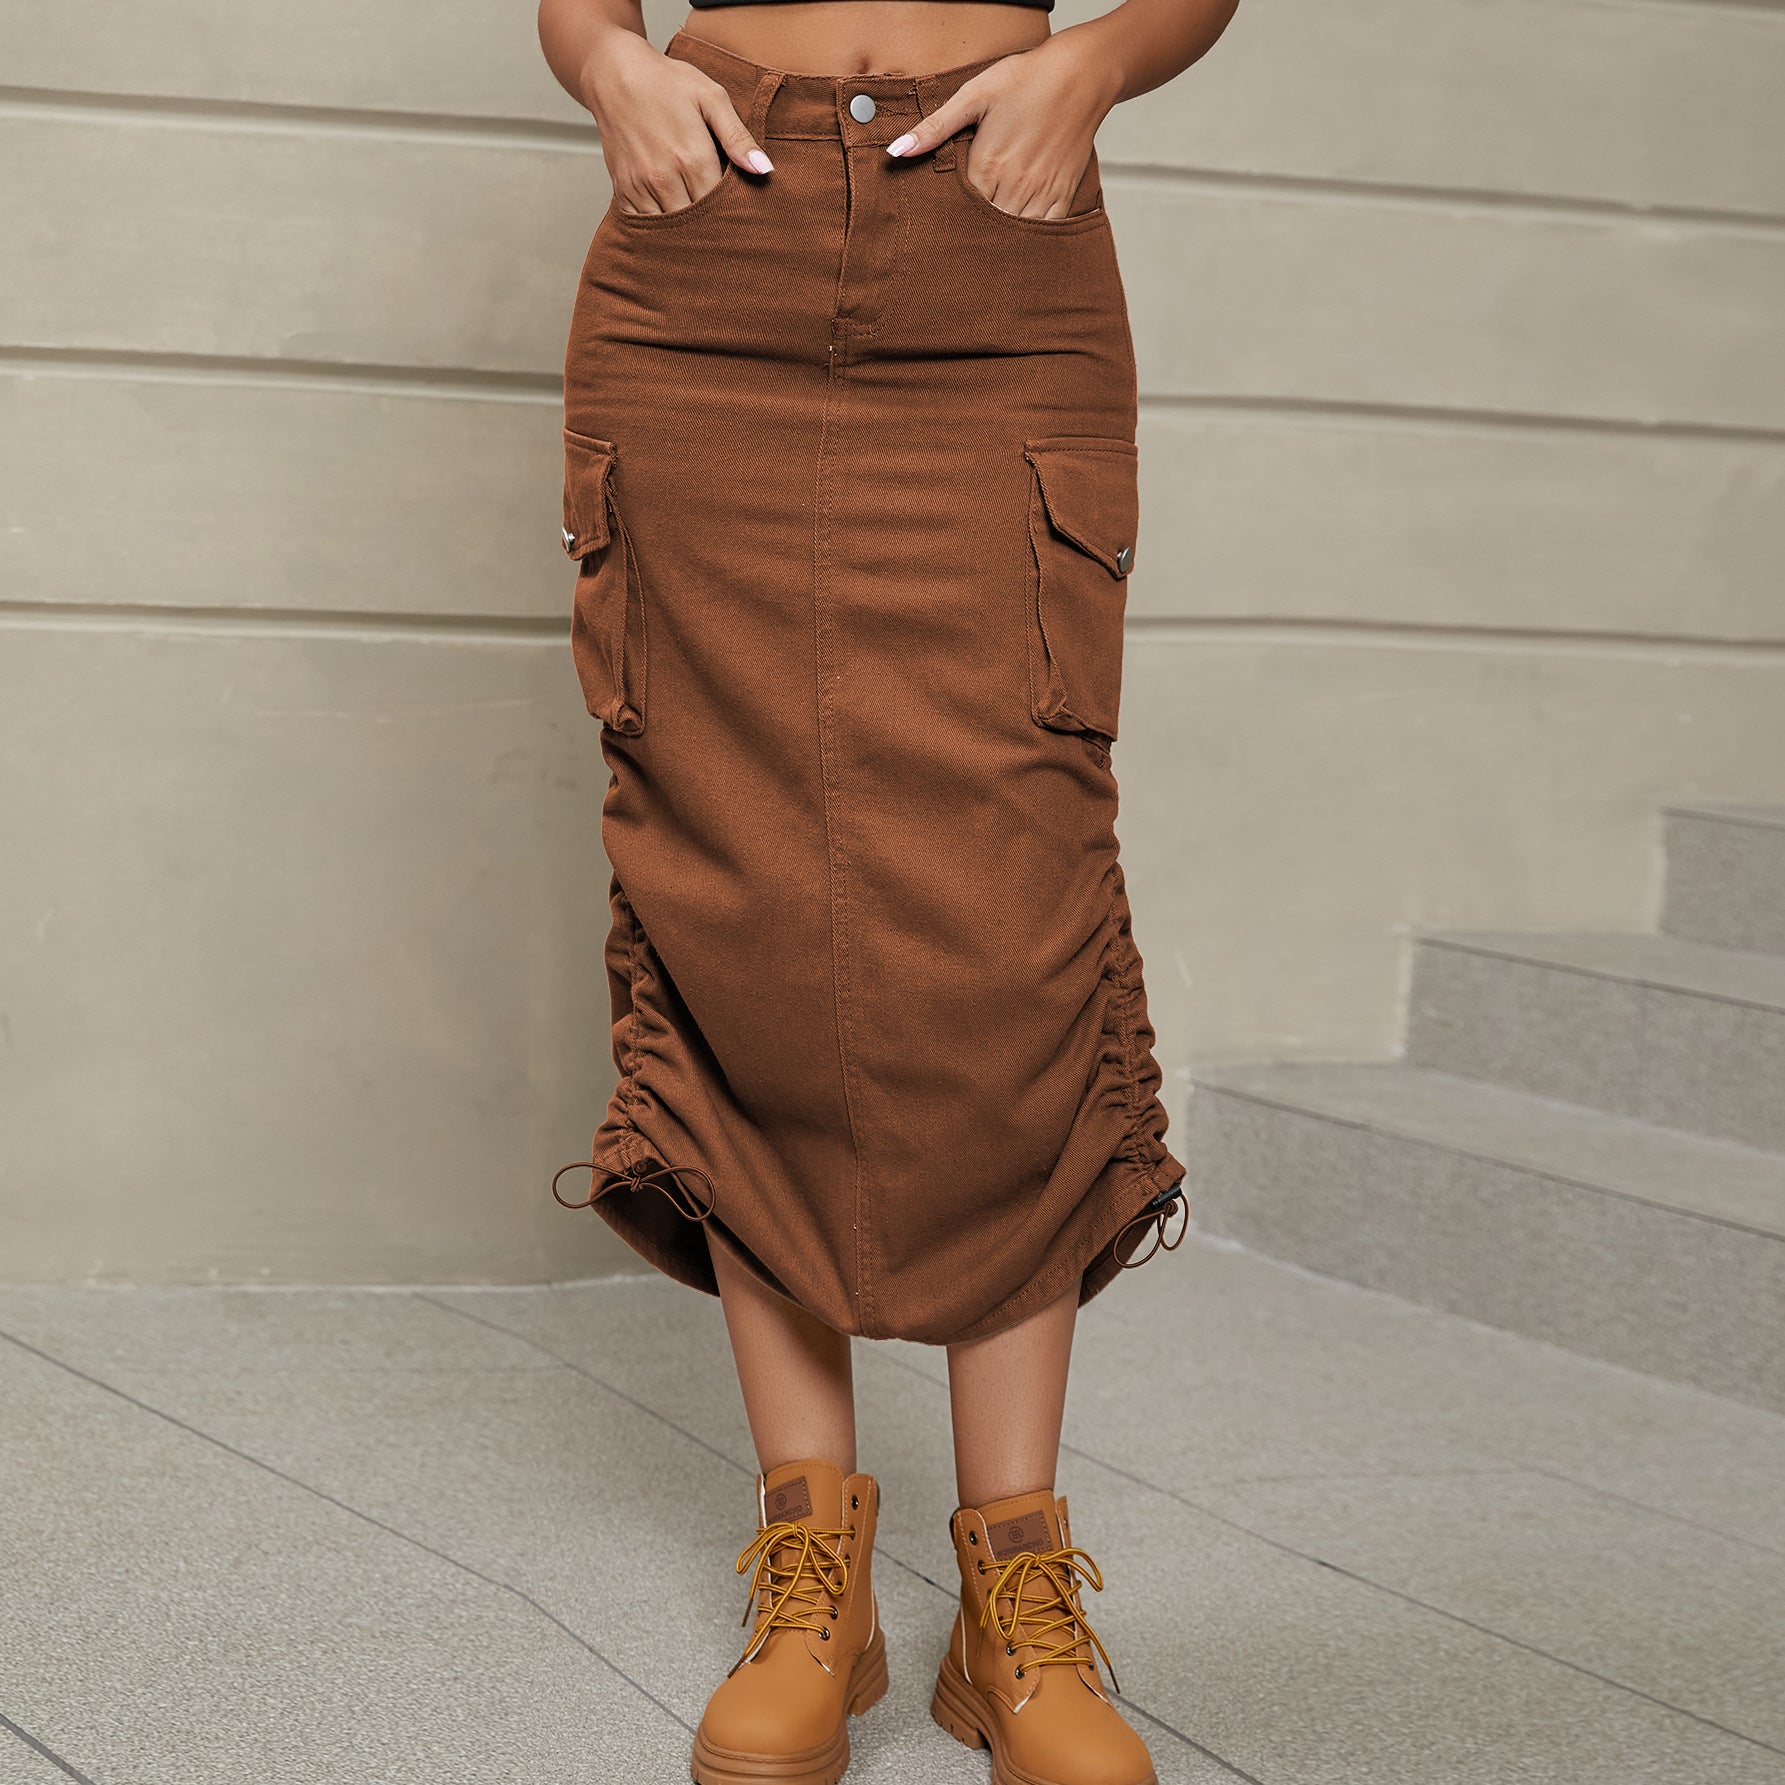 Front facing view of model wearing drawstring ruched skirt in the color chestnut.